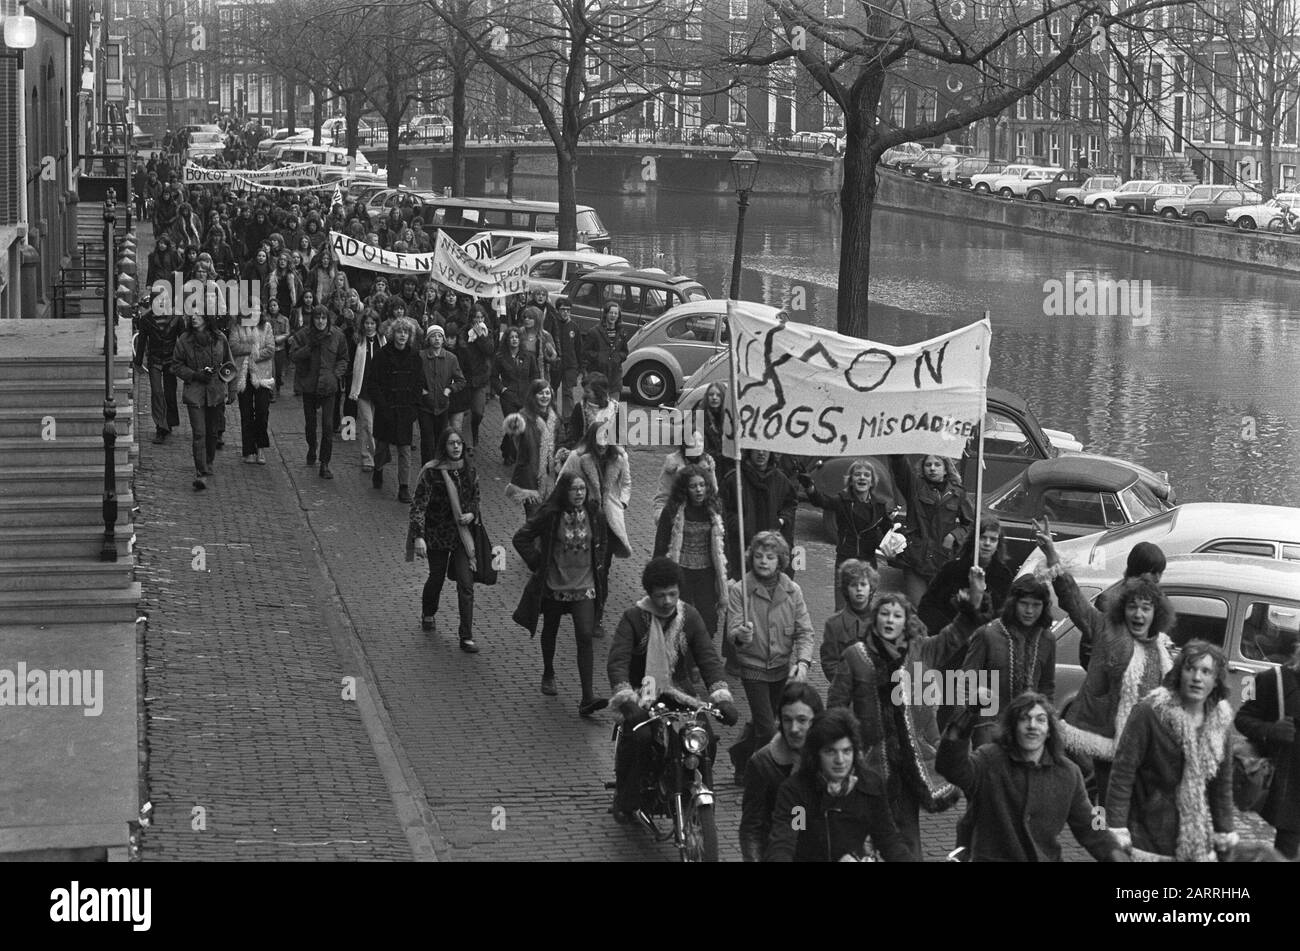 Schools strike in Amsterdam to protest against war in Vietnam, the protesters at the Prinsengracht Date: January 18, 1973 Location: Amsterdam, Noord-Holland Keywords: SCHOLIER, protesters, wars, protests Stock Photo